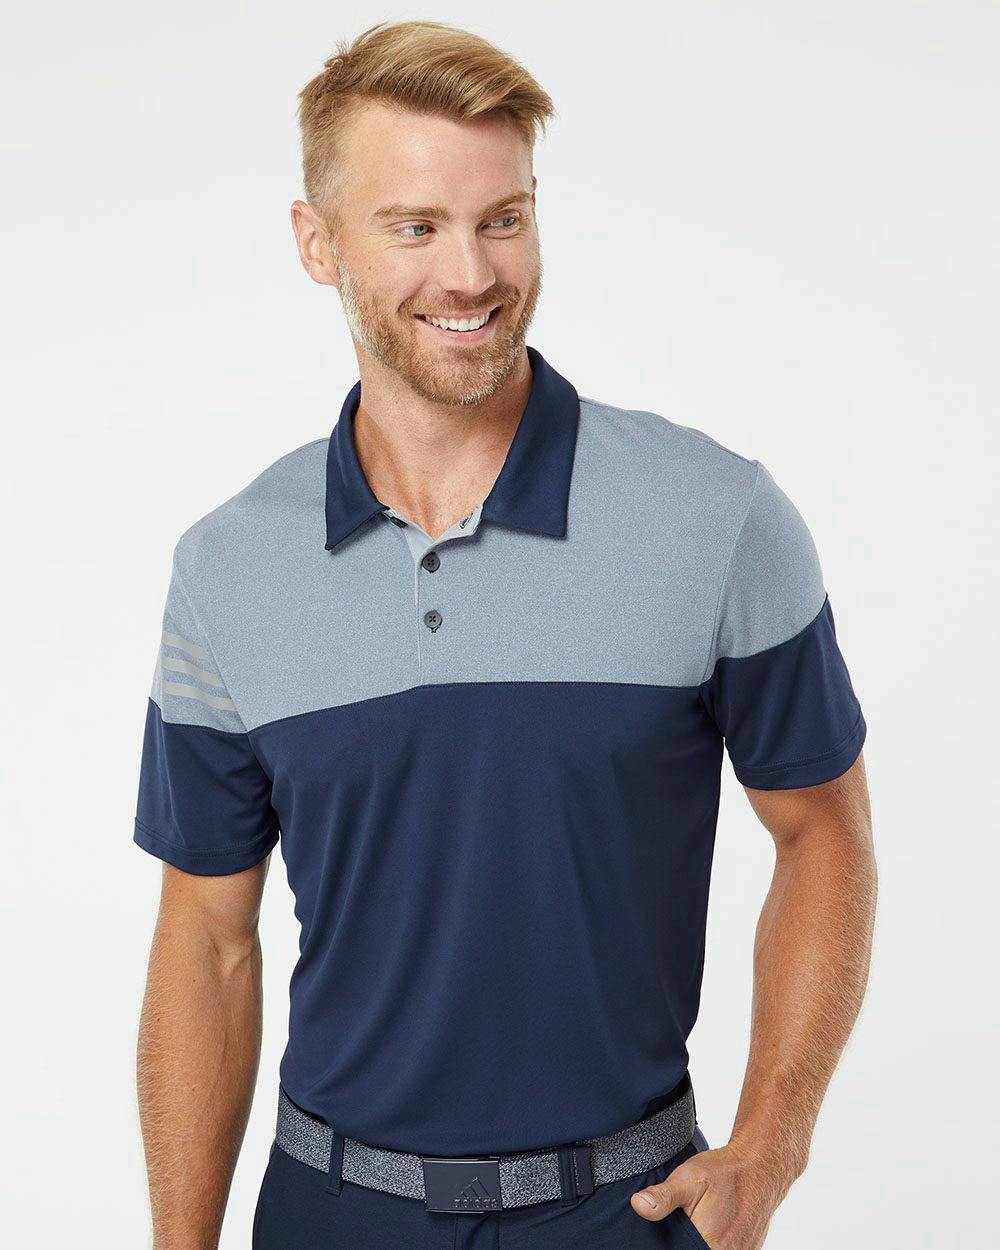 Image for Heathered 3-Stripes Colorblocked Polo - A213